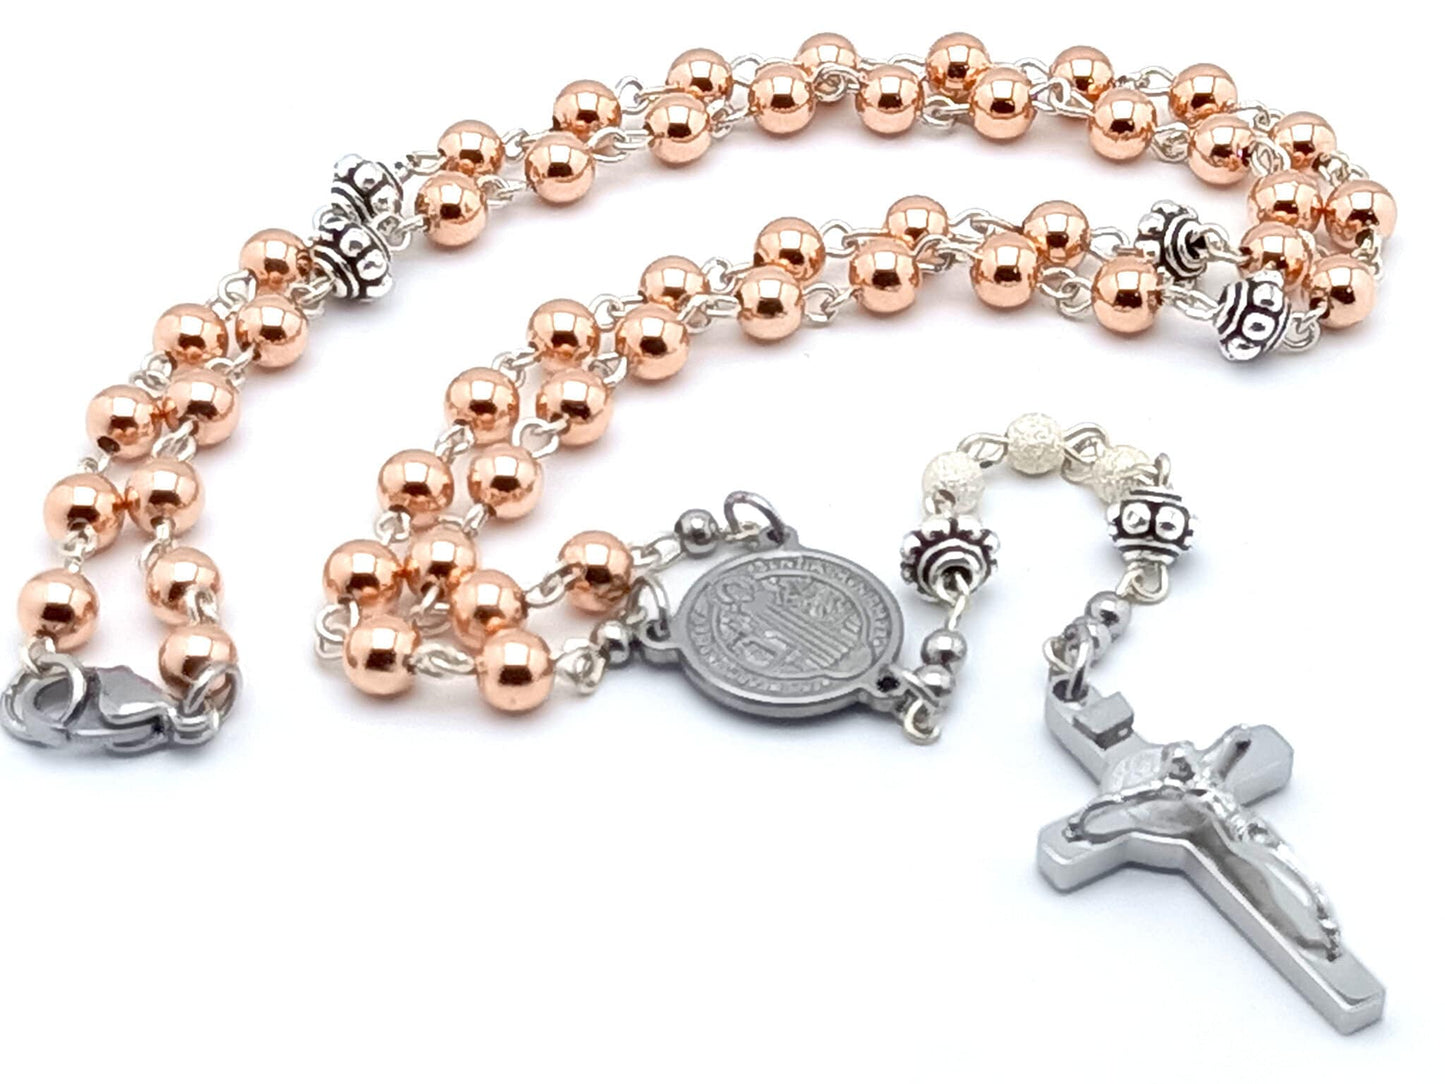 Saint Benedict unique rosary beads 925 sterling silver rose gold rosary bead necklace with stainless steel crucifix and centre medal.